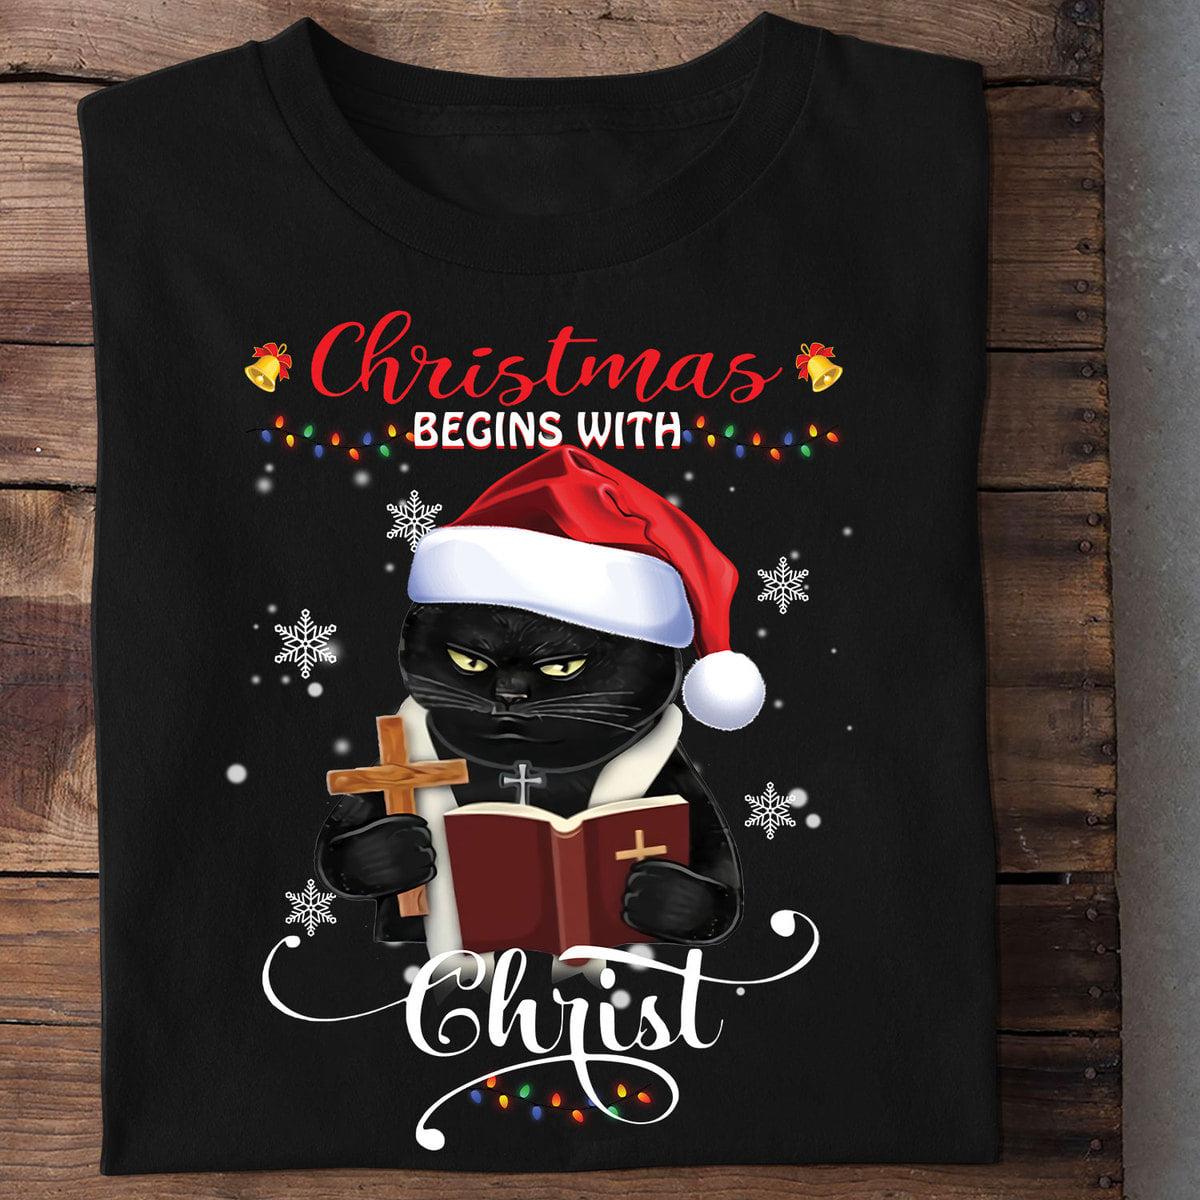 Christmas begins with Christ - Cat with Holy Bible, Jesus for Christmas, Ugly sweater gift